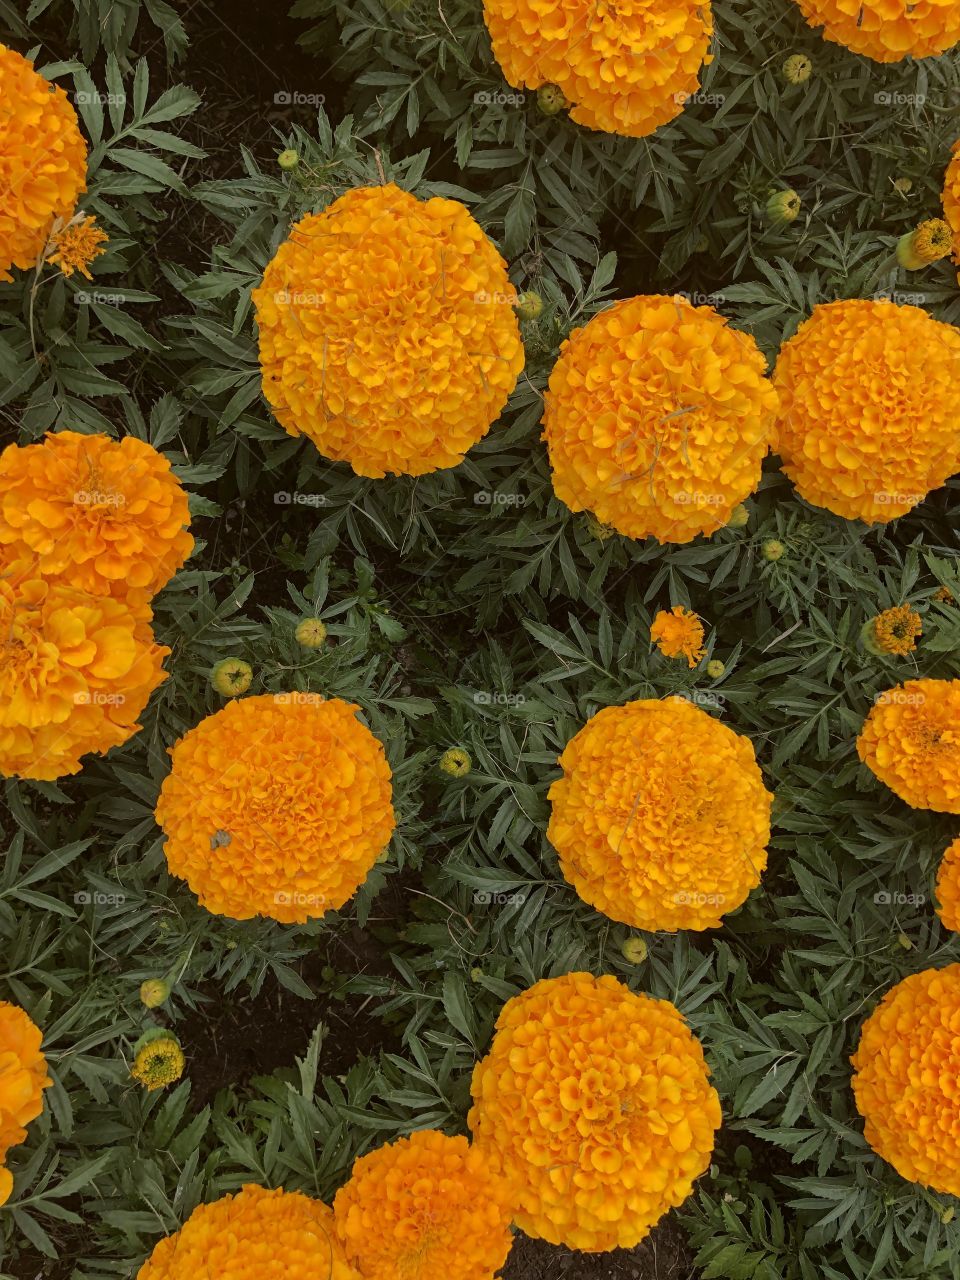 Some very lovely giant marigolds in a striking orange colour.